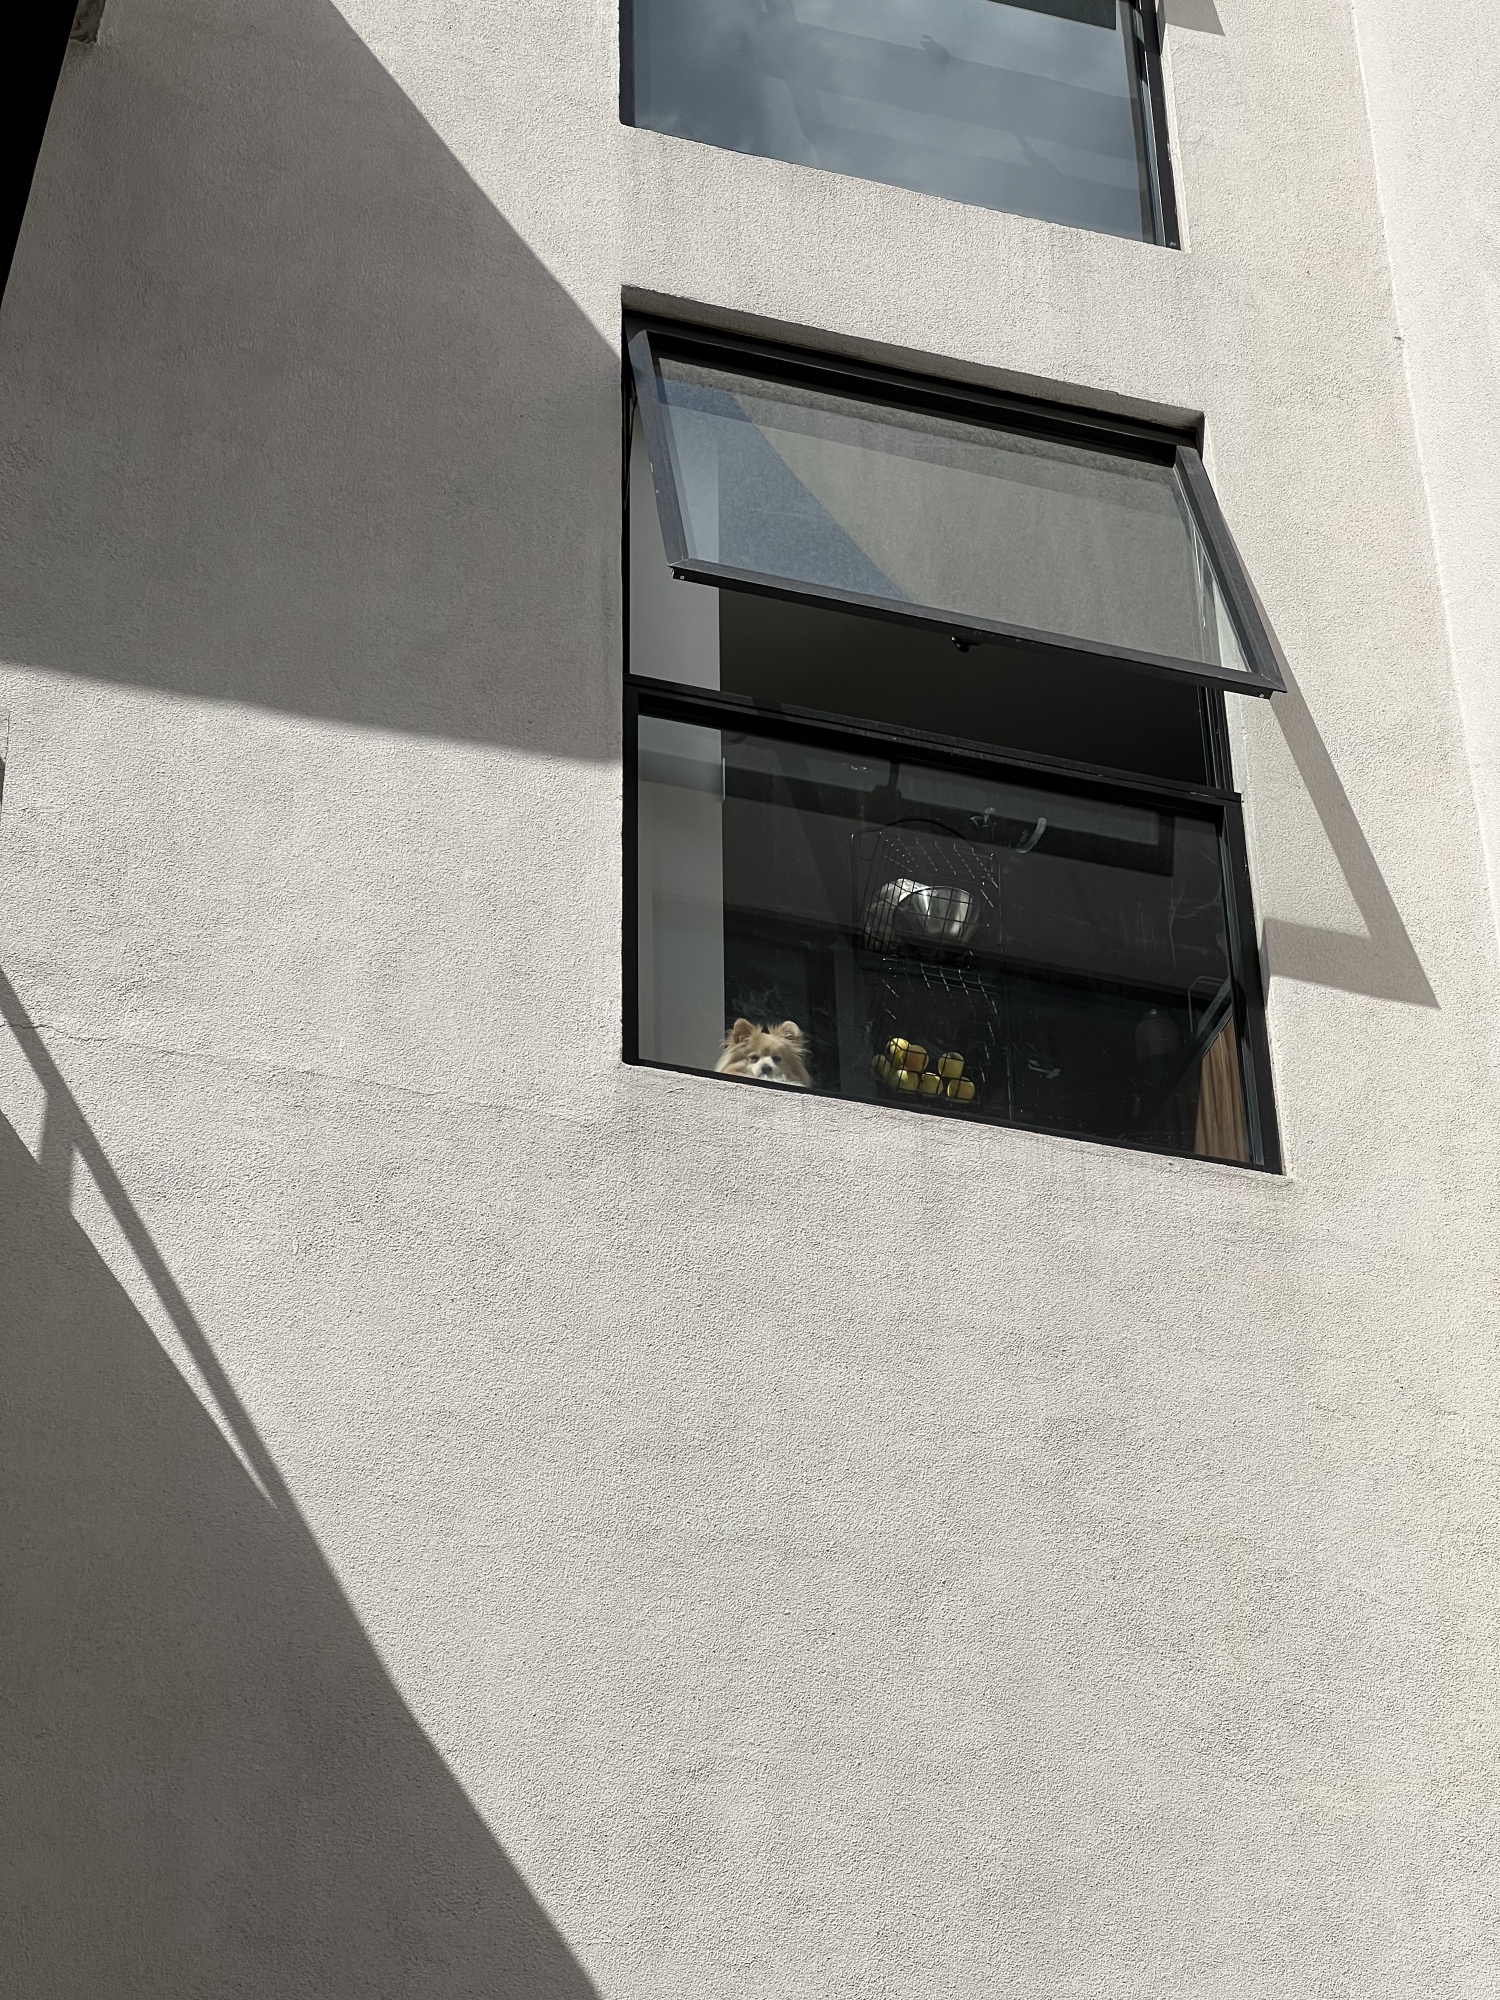 Our neighbor's dog loves peeping at us when we pass by.